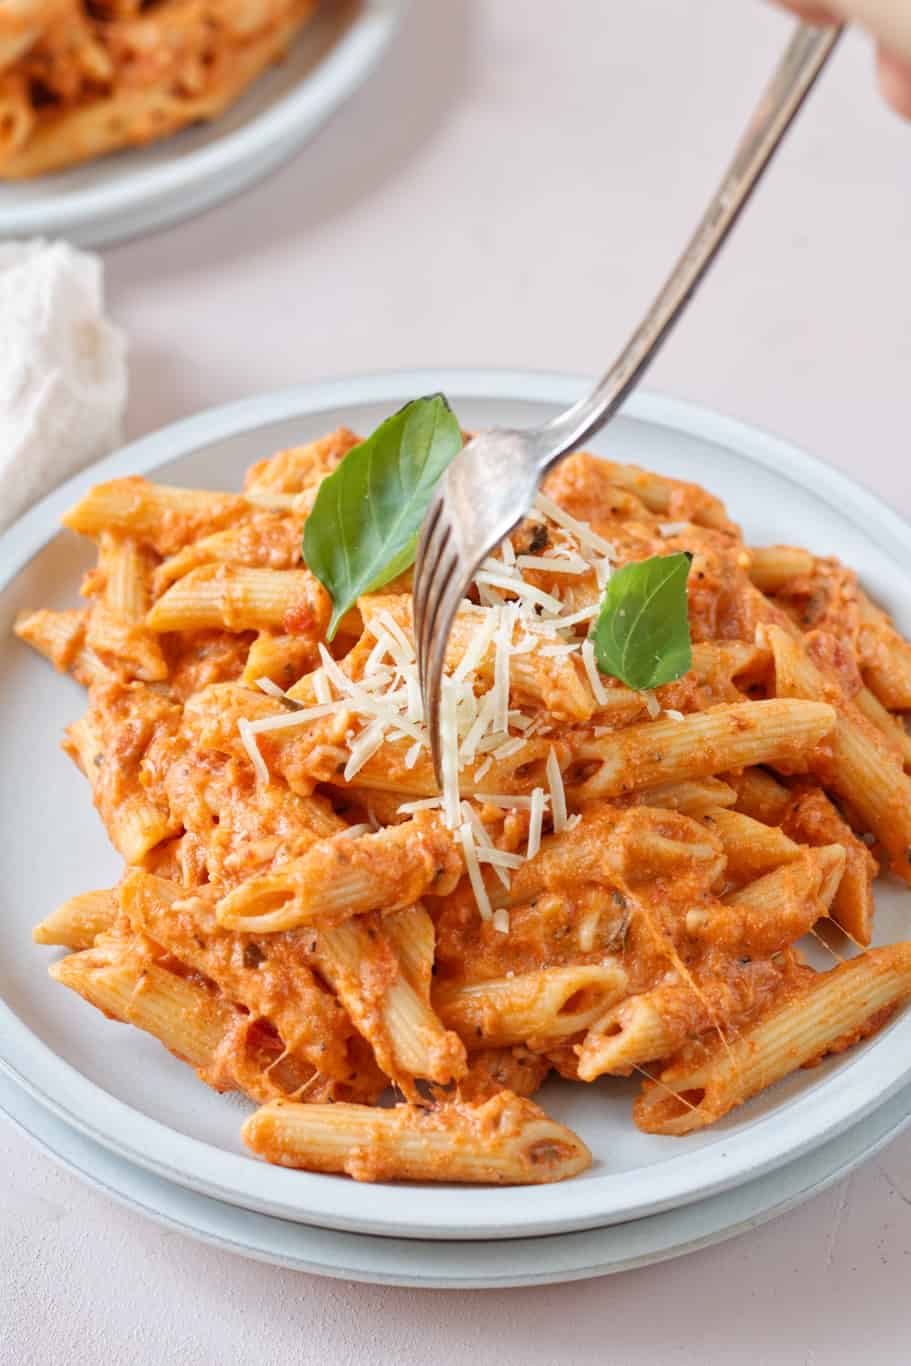 This four cheese pasta Cheesecake Factory copycat is so cheesy and delicious, ready in 30 minutes, and tastes exactly like the saucy and satisfying takeout original